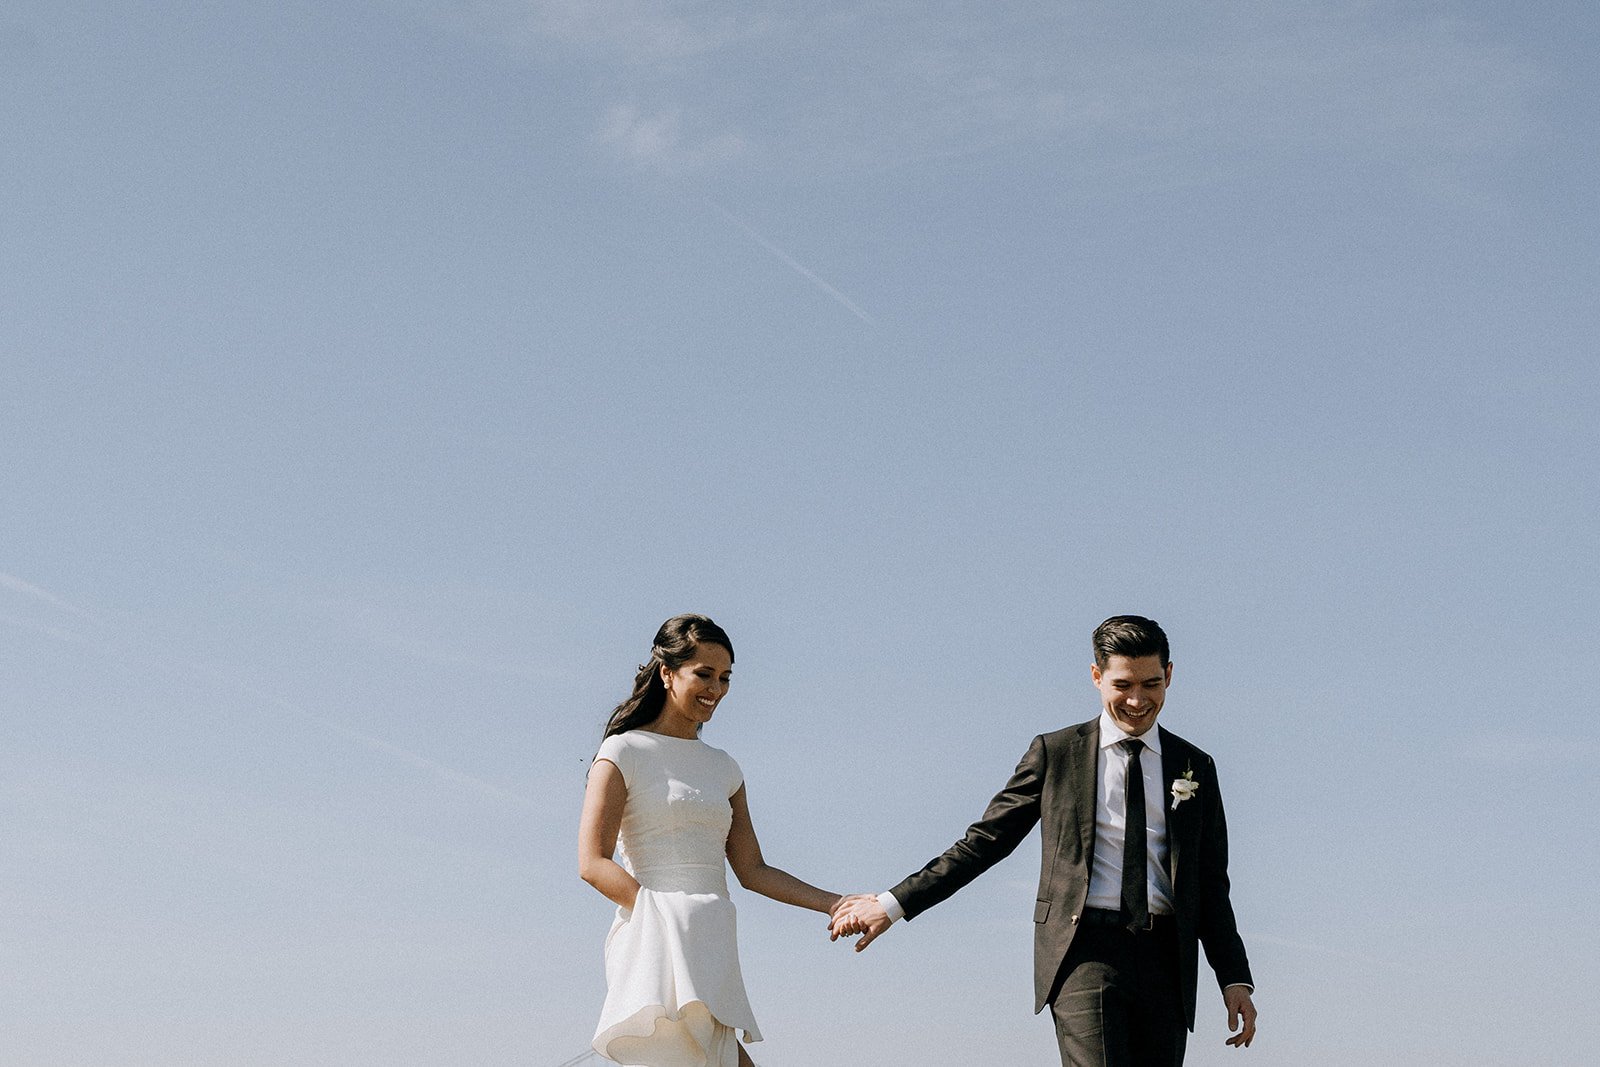  bride and groom smiling holding hands with the sky as a backdrop  